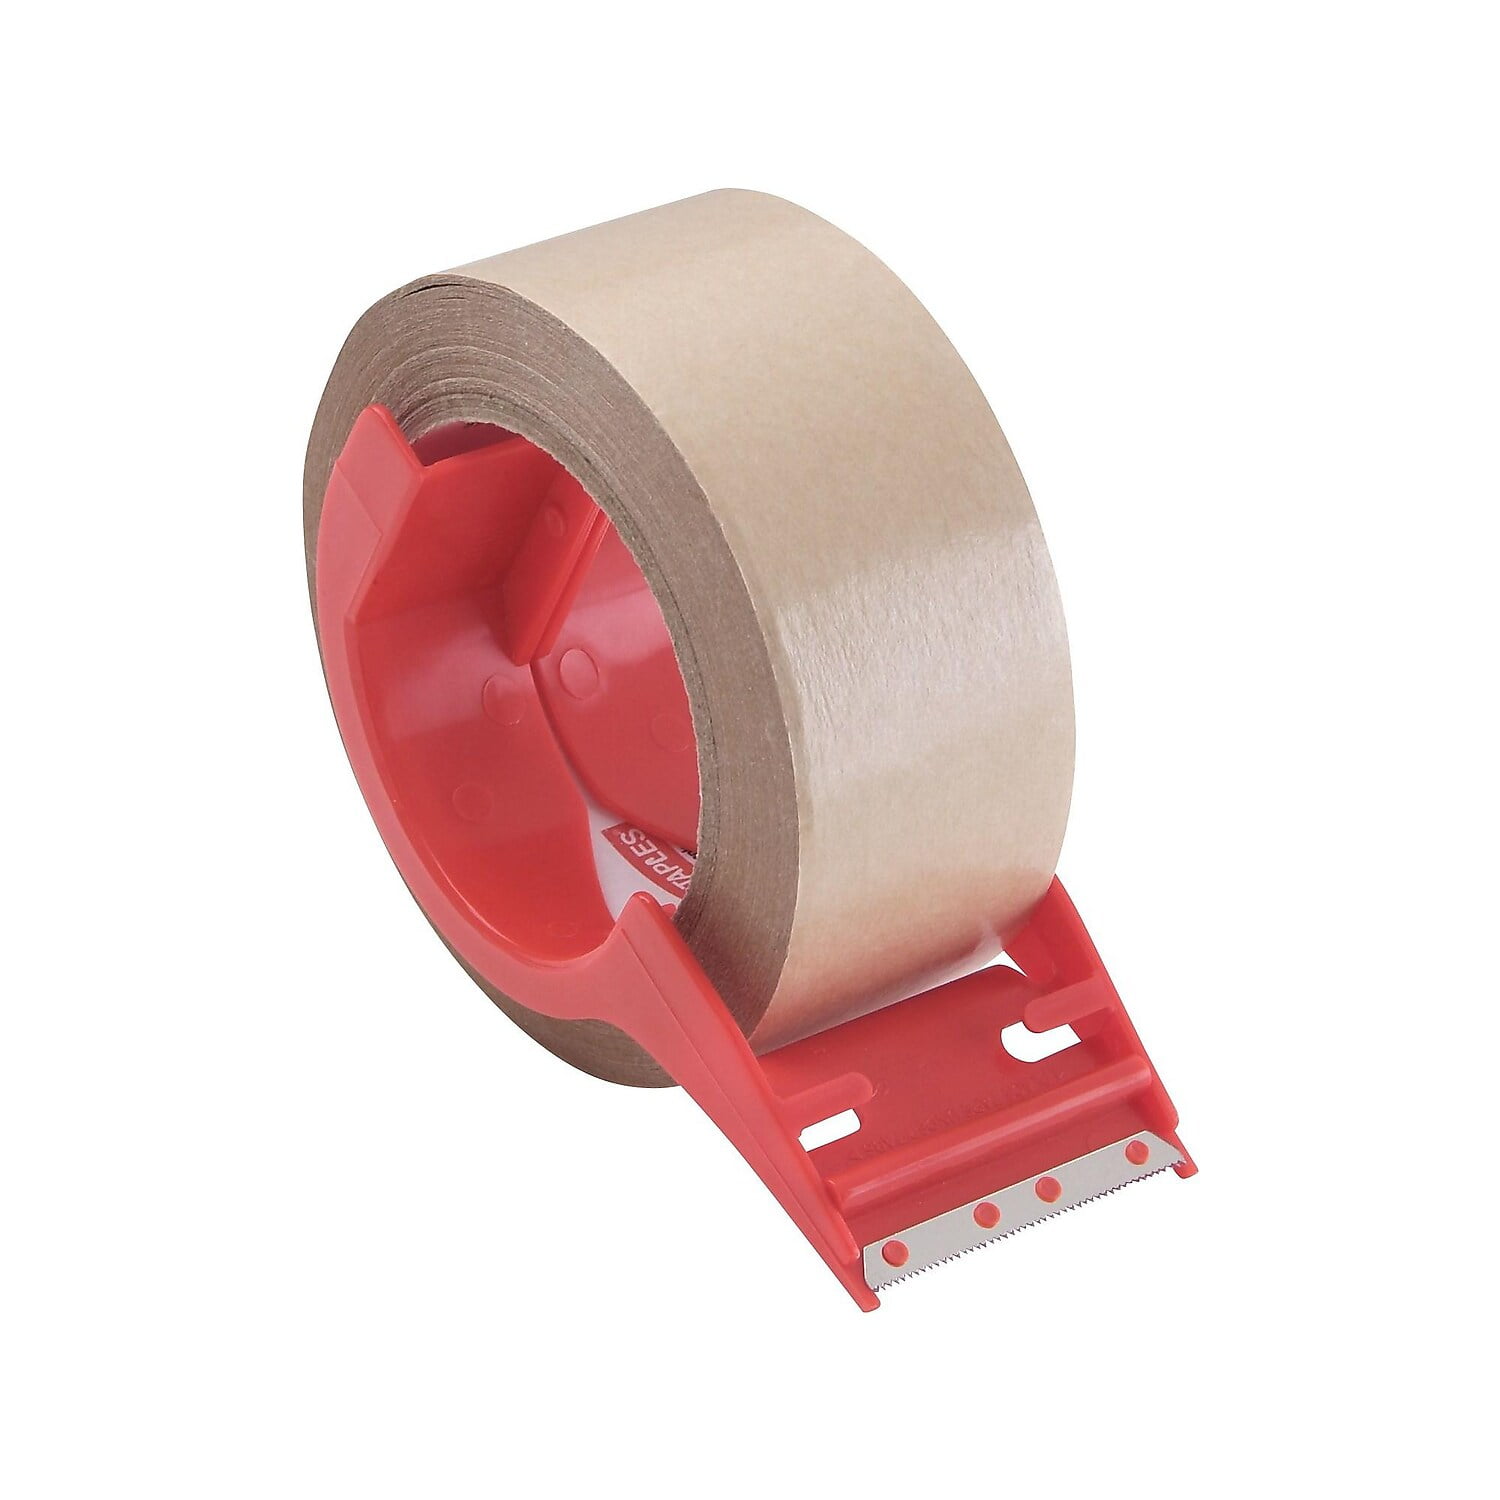 Brixwell DKH100006 Flatback Brown Paper Packing Tape 2 Inch x 60 Yard Made  in the USA